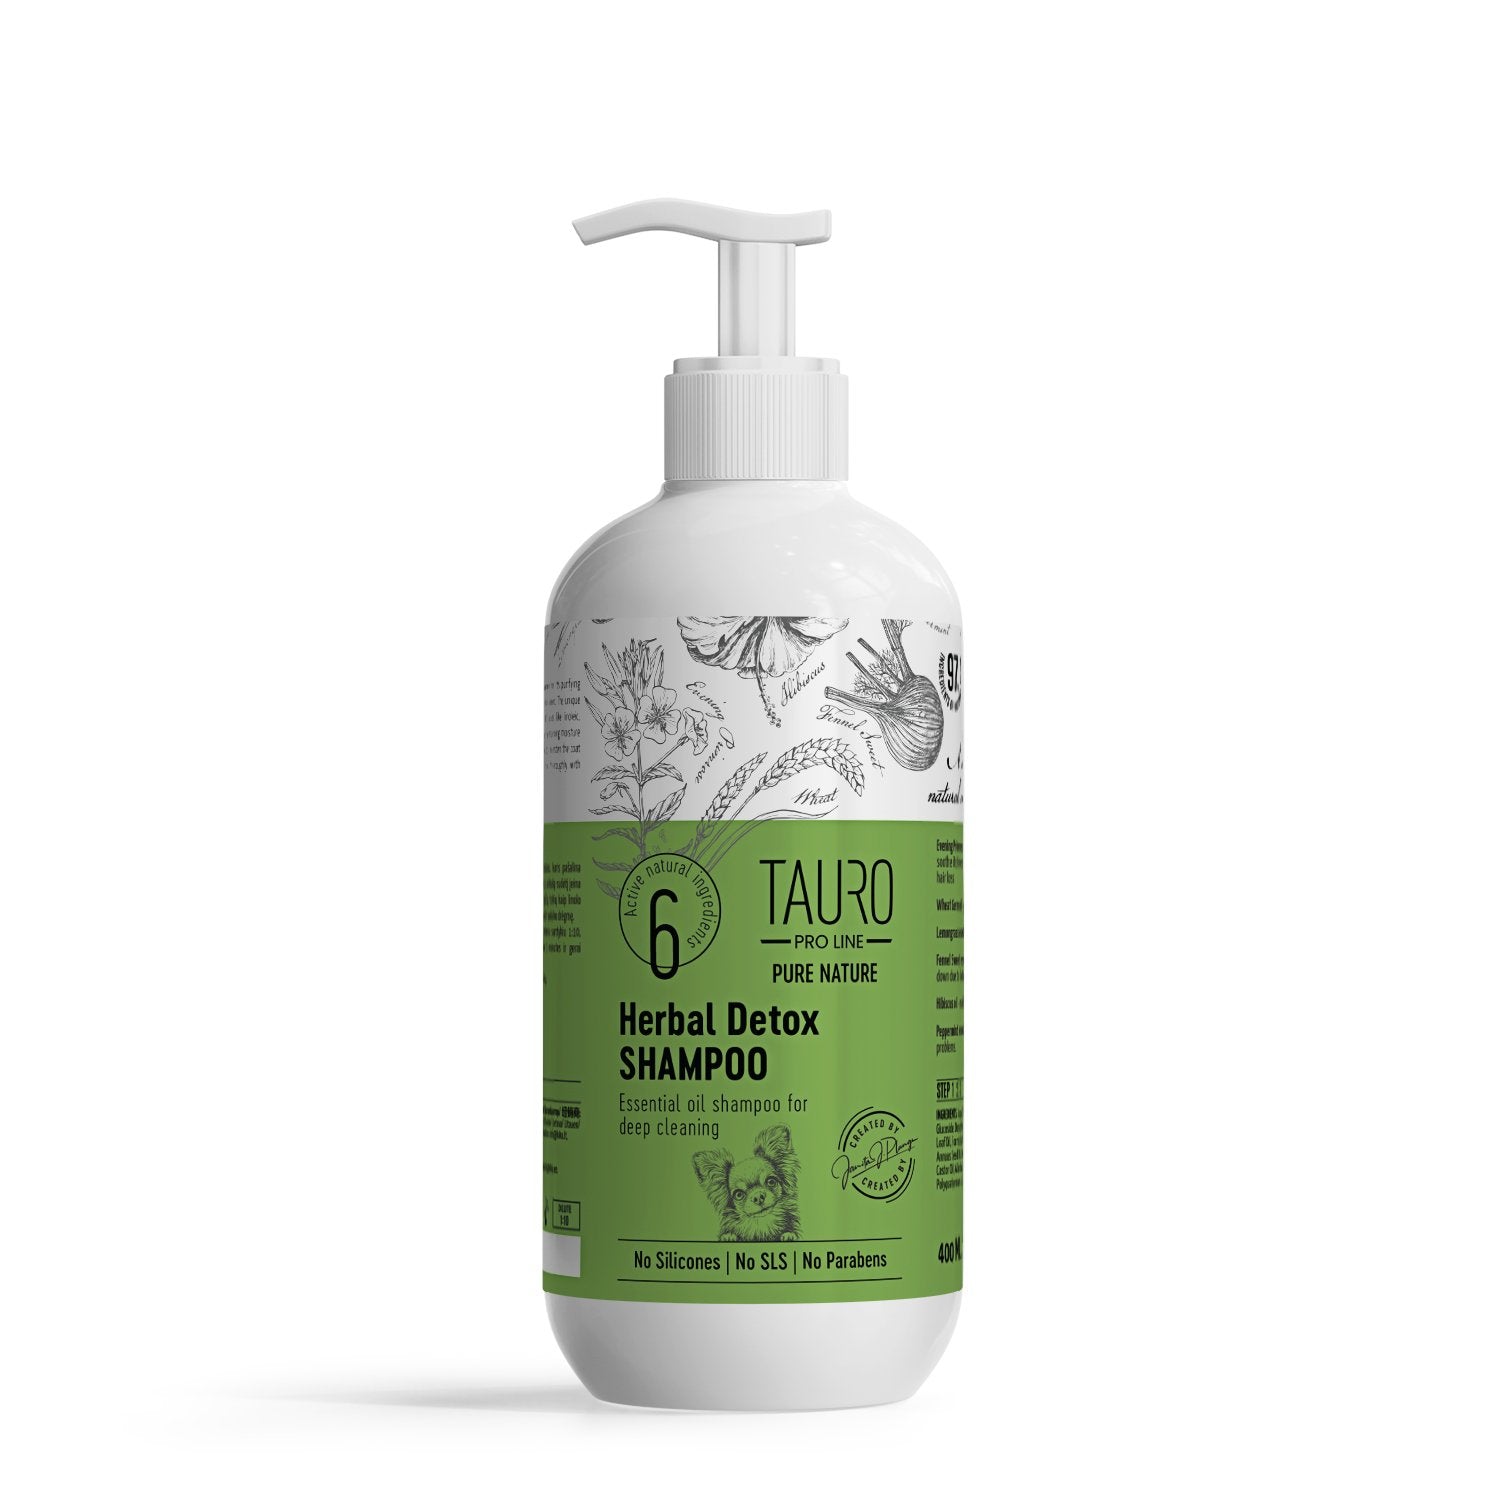 Tauro Pro Line shampoo from Tauro brand, favorite online Shampoo: your Pro Line Buy